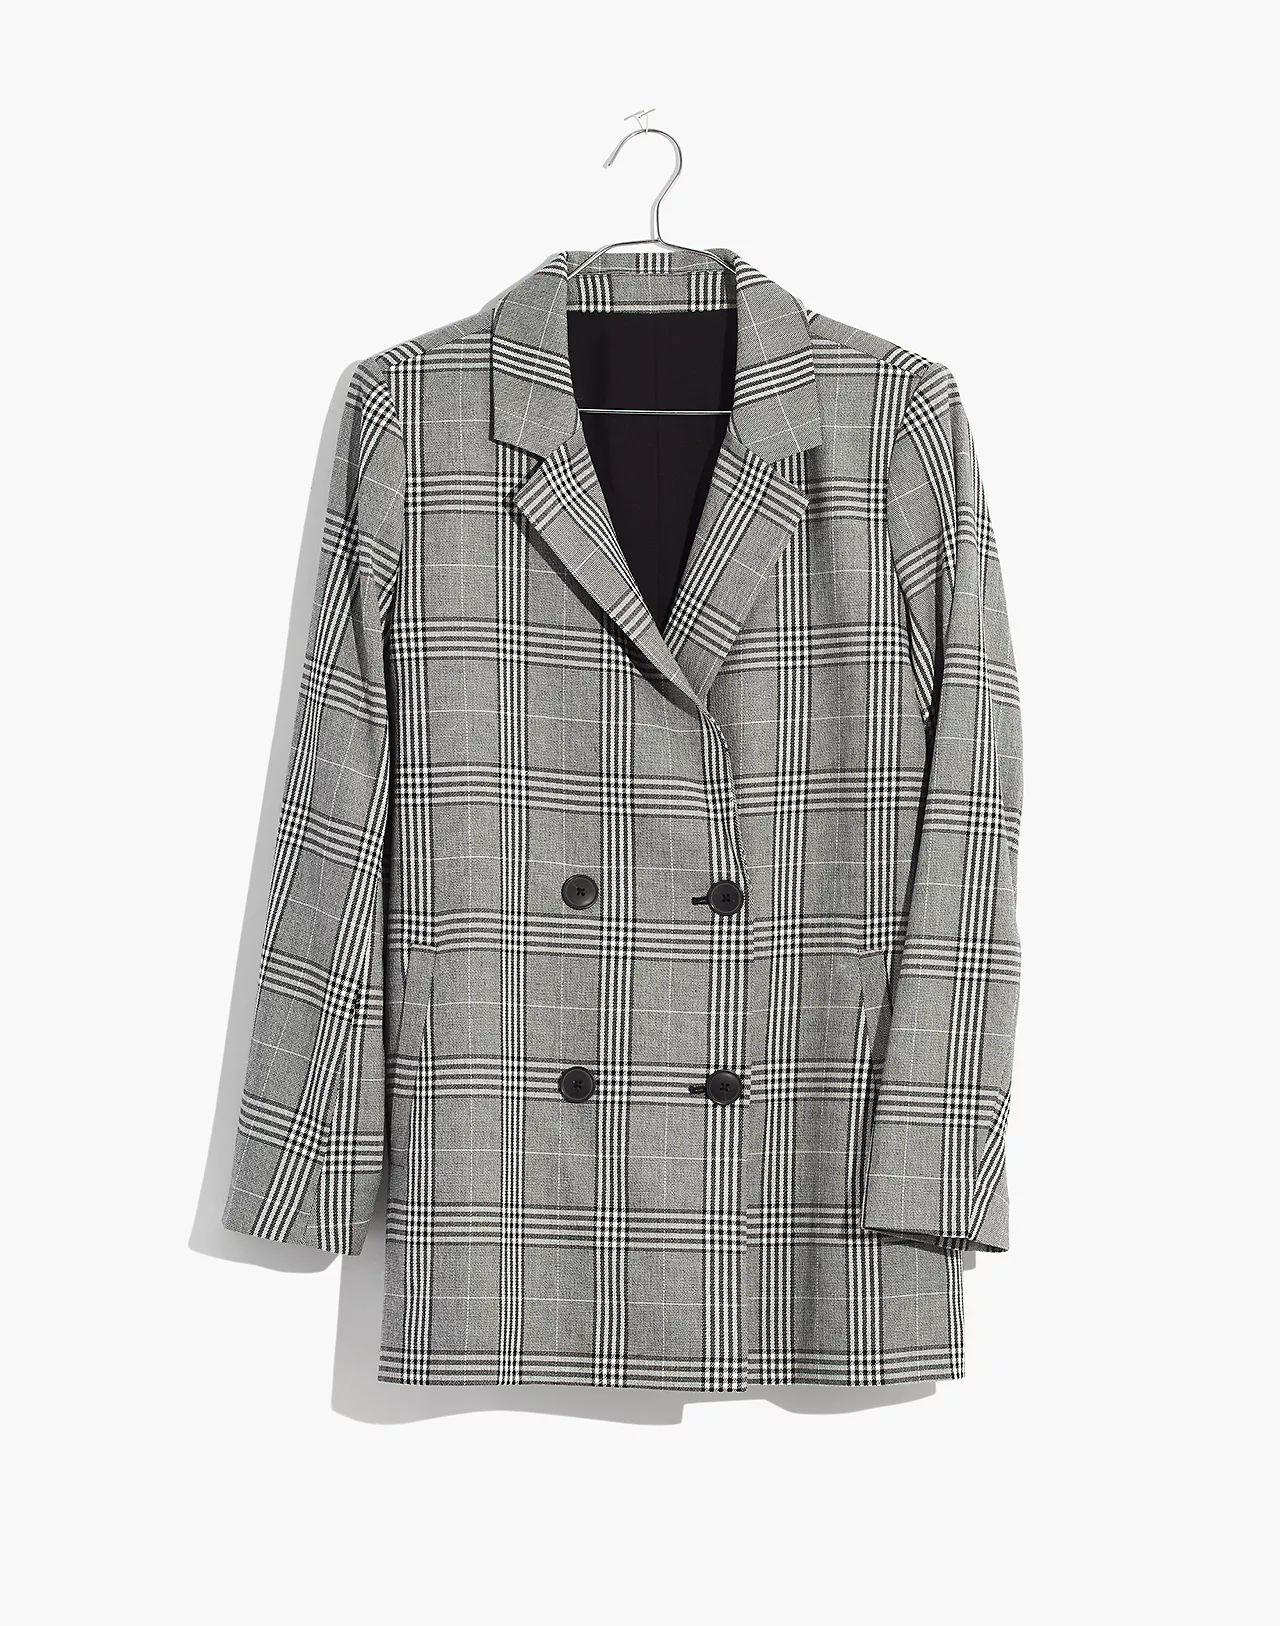 Caldwell Double-Breasted Blazer in Plaid | Madewell